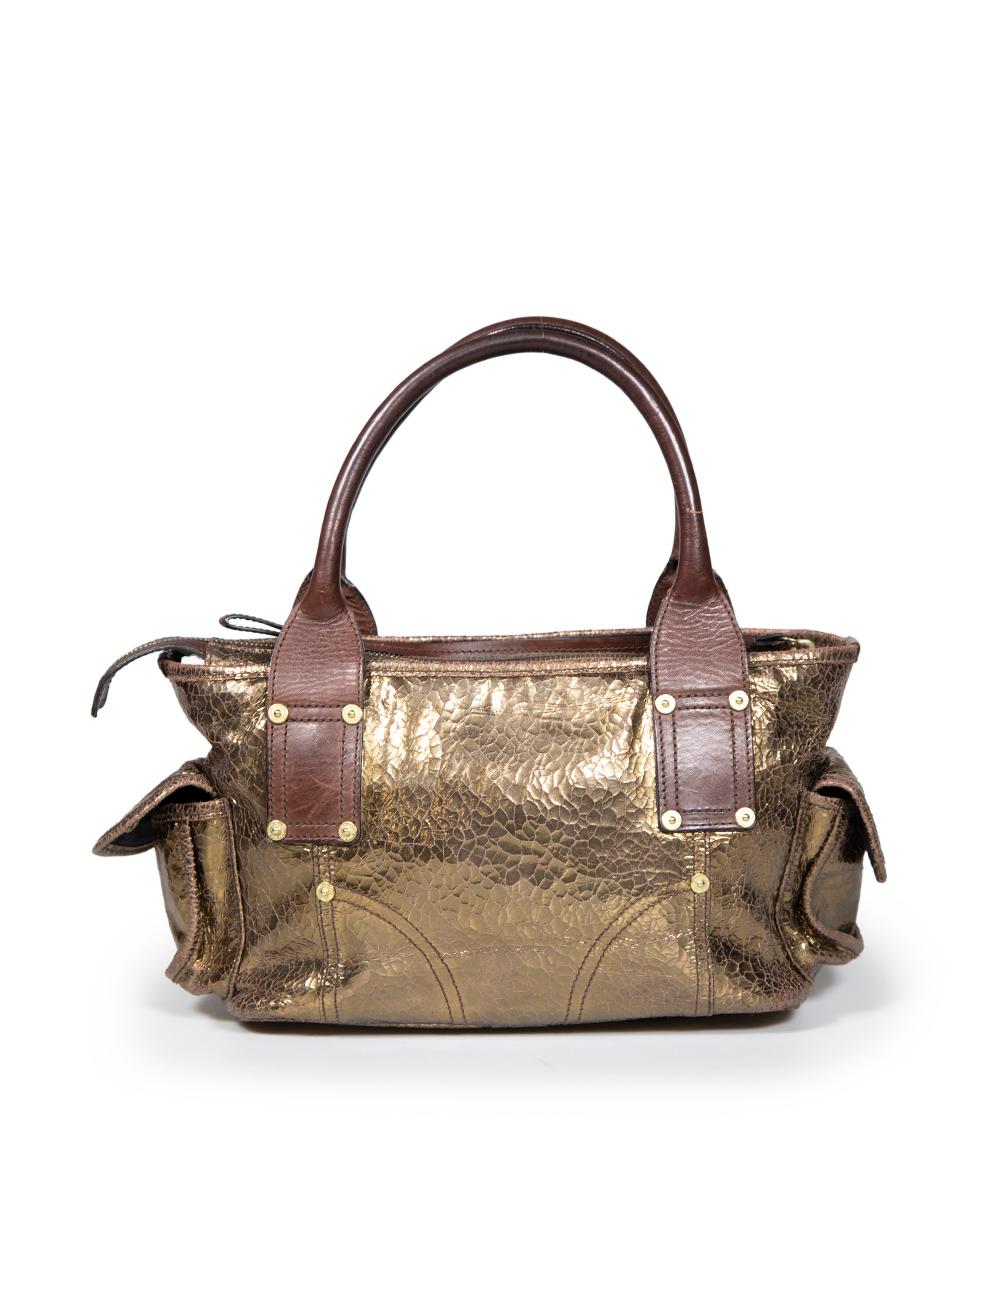 Mulberry Gold Leather Distressed Jody Handbag In Good Condition For Sale In London, GB